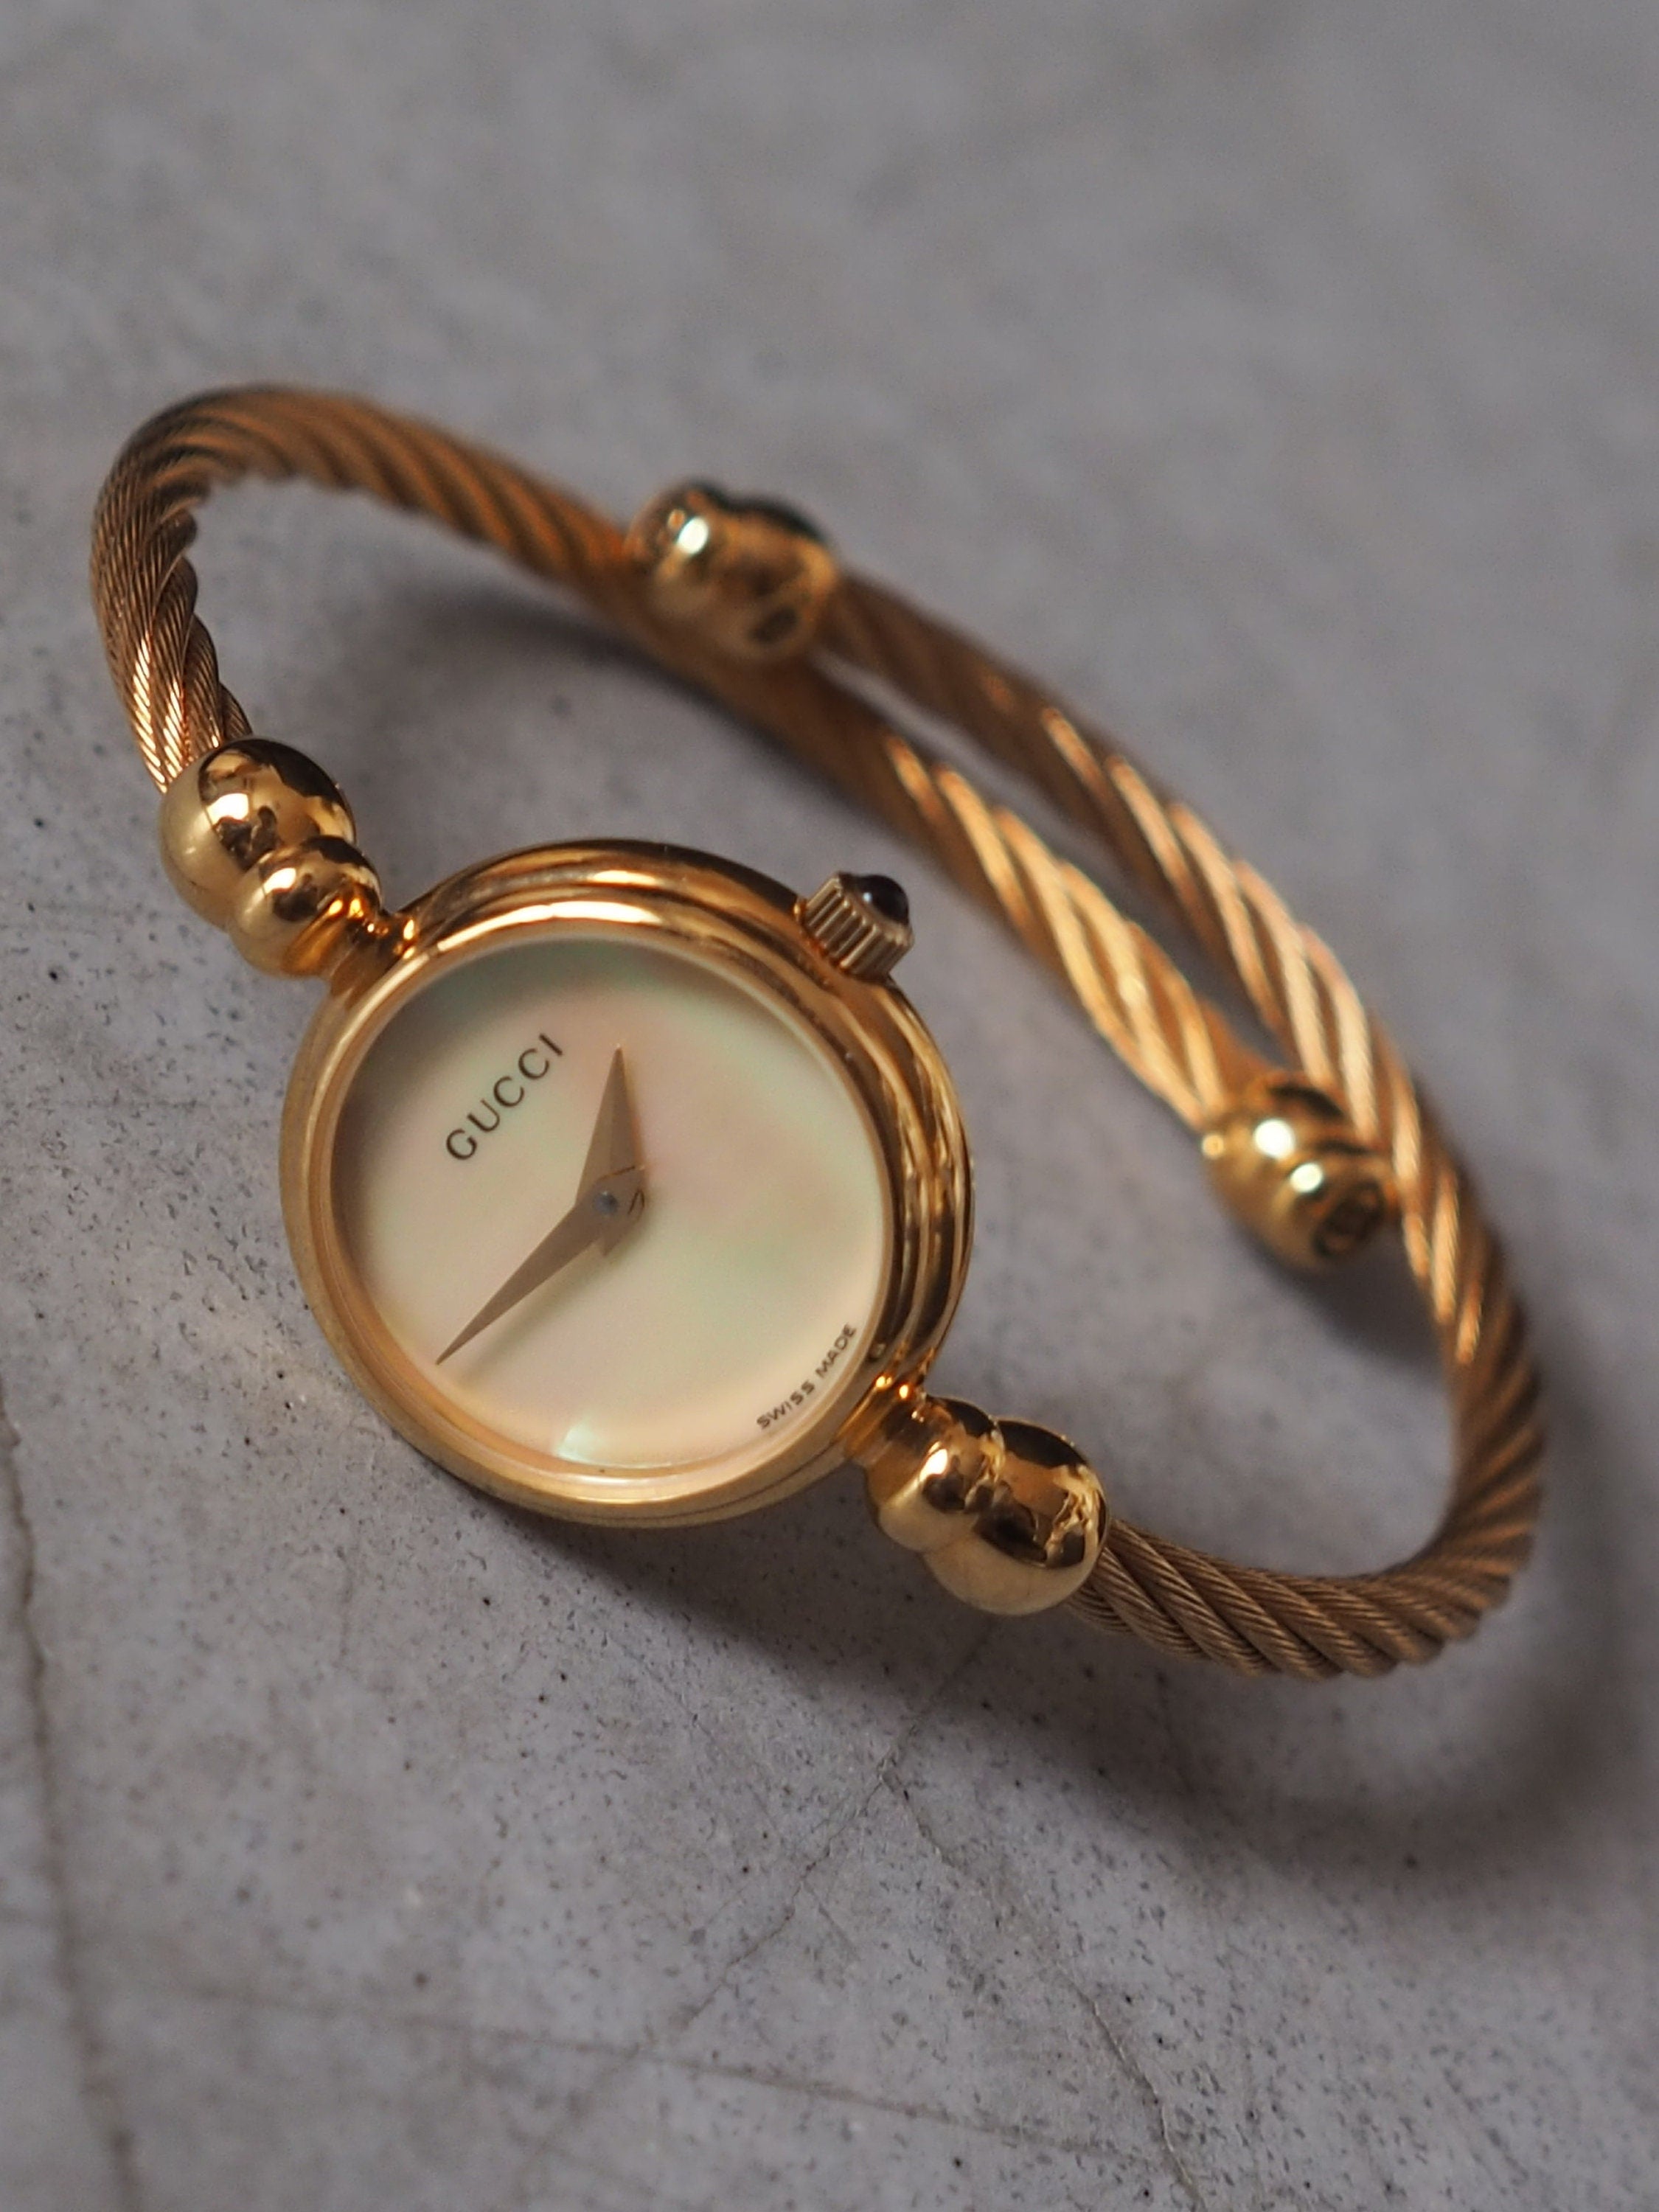 GUCCI Shell Bangle Watch Wristwatch Gold Metal Vintage Authentic